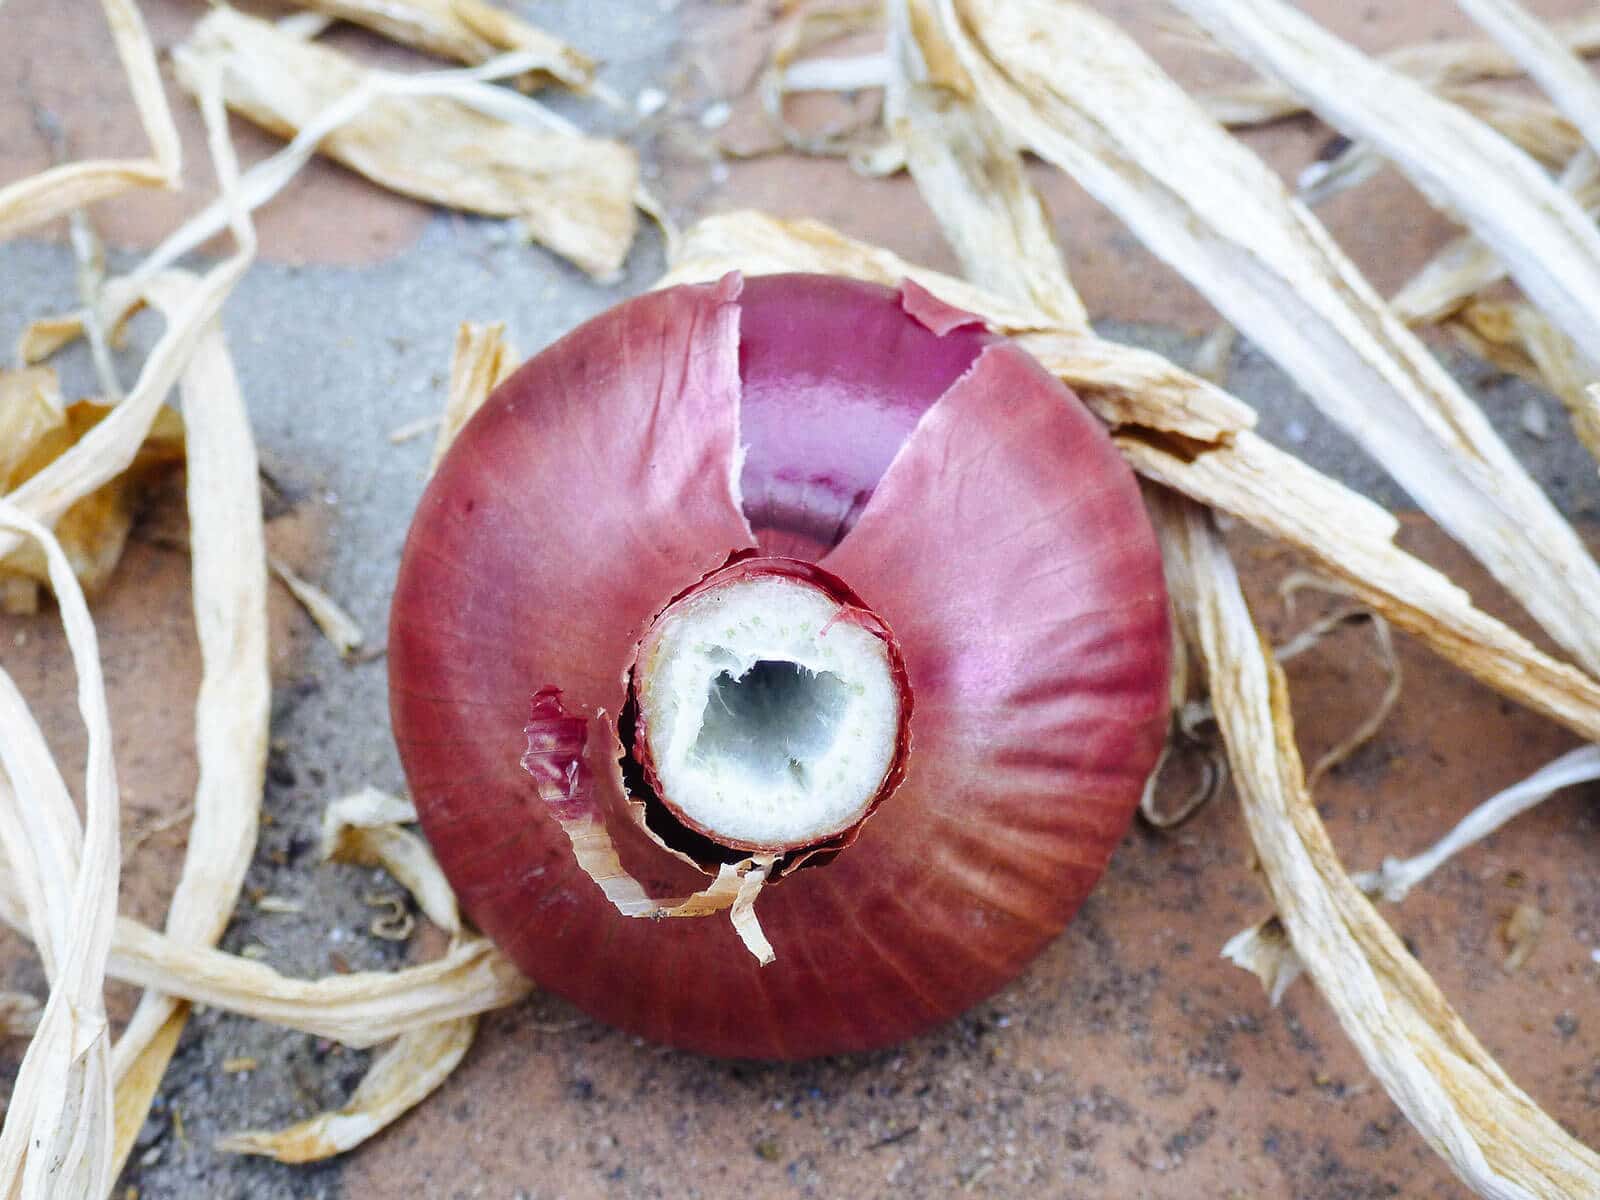 Red onion showing cross-section of flower stalk in the center of the bulb